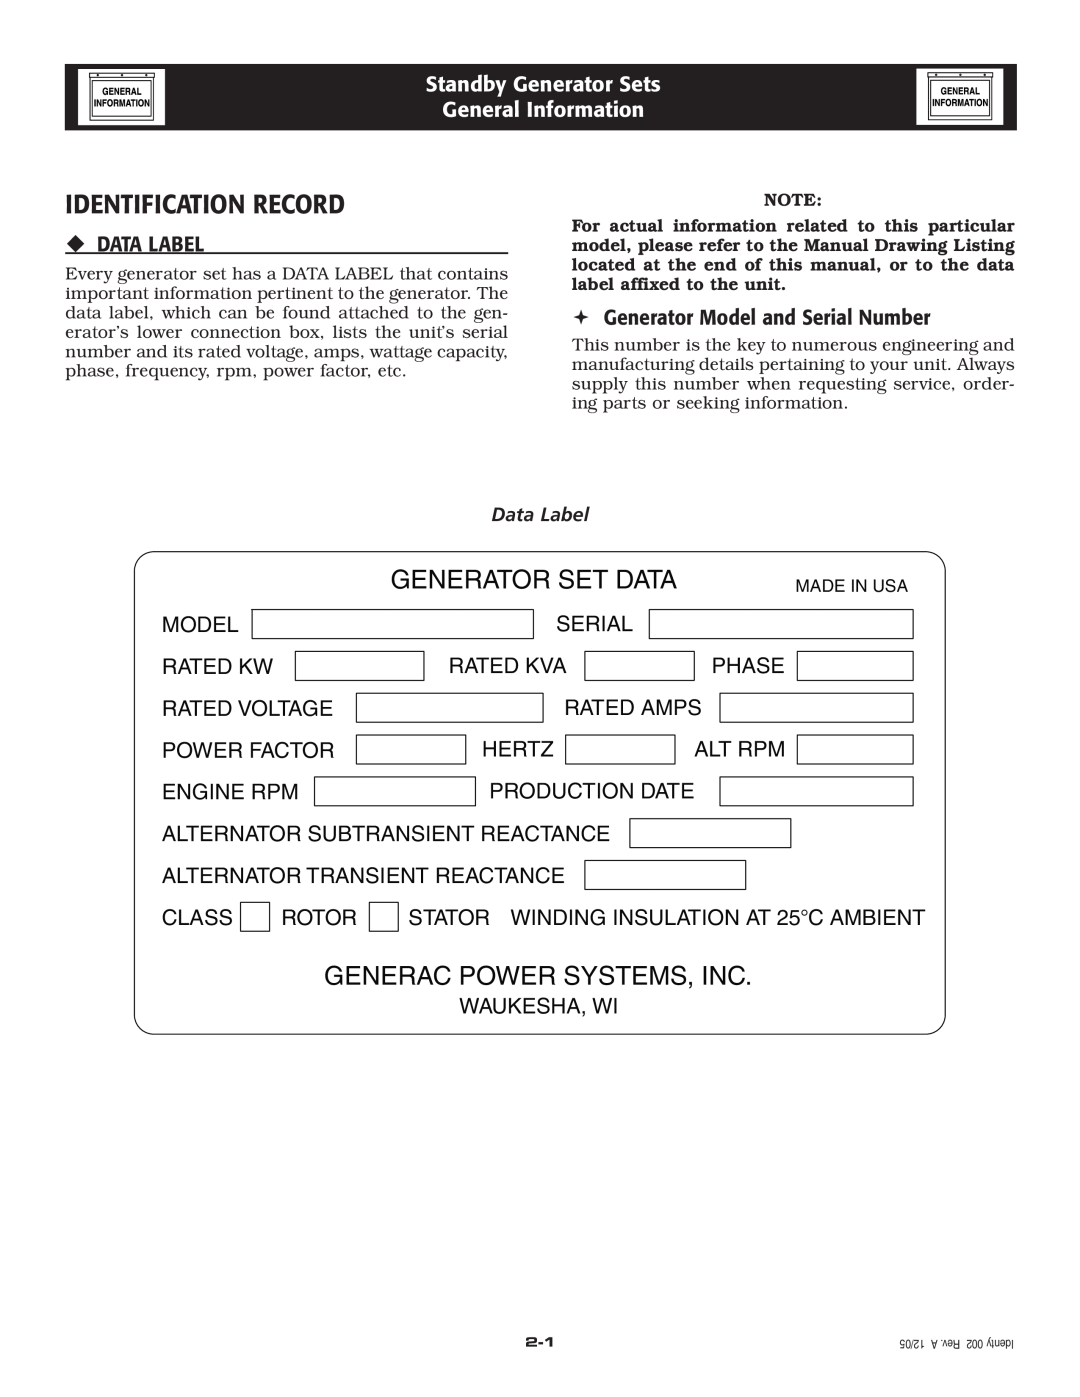 Generac Power Systems 005210-0 owner manual Identification Record, Standby Generator Sets General Information, ‹Data Label 